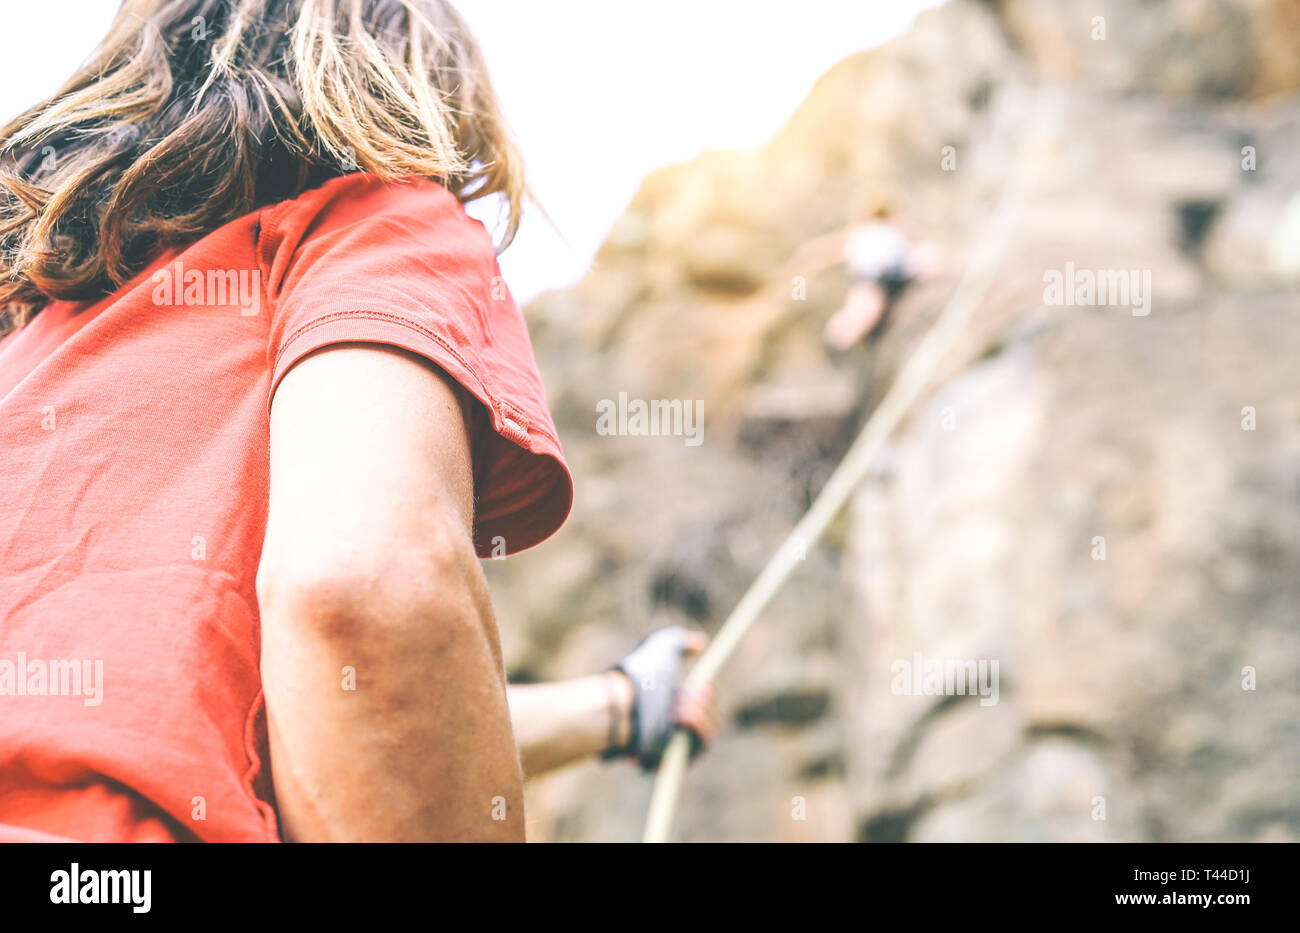 Woman climbing up on mountain cliff while man helping her to climb to the top holding the rope - Climber in action on the rock near the peak Stock Photo